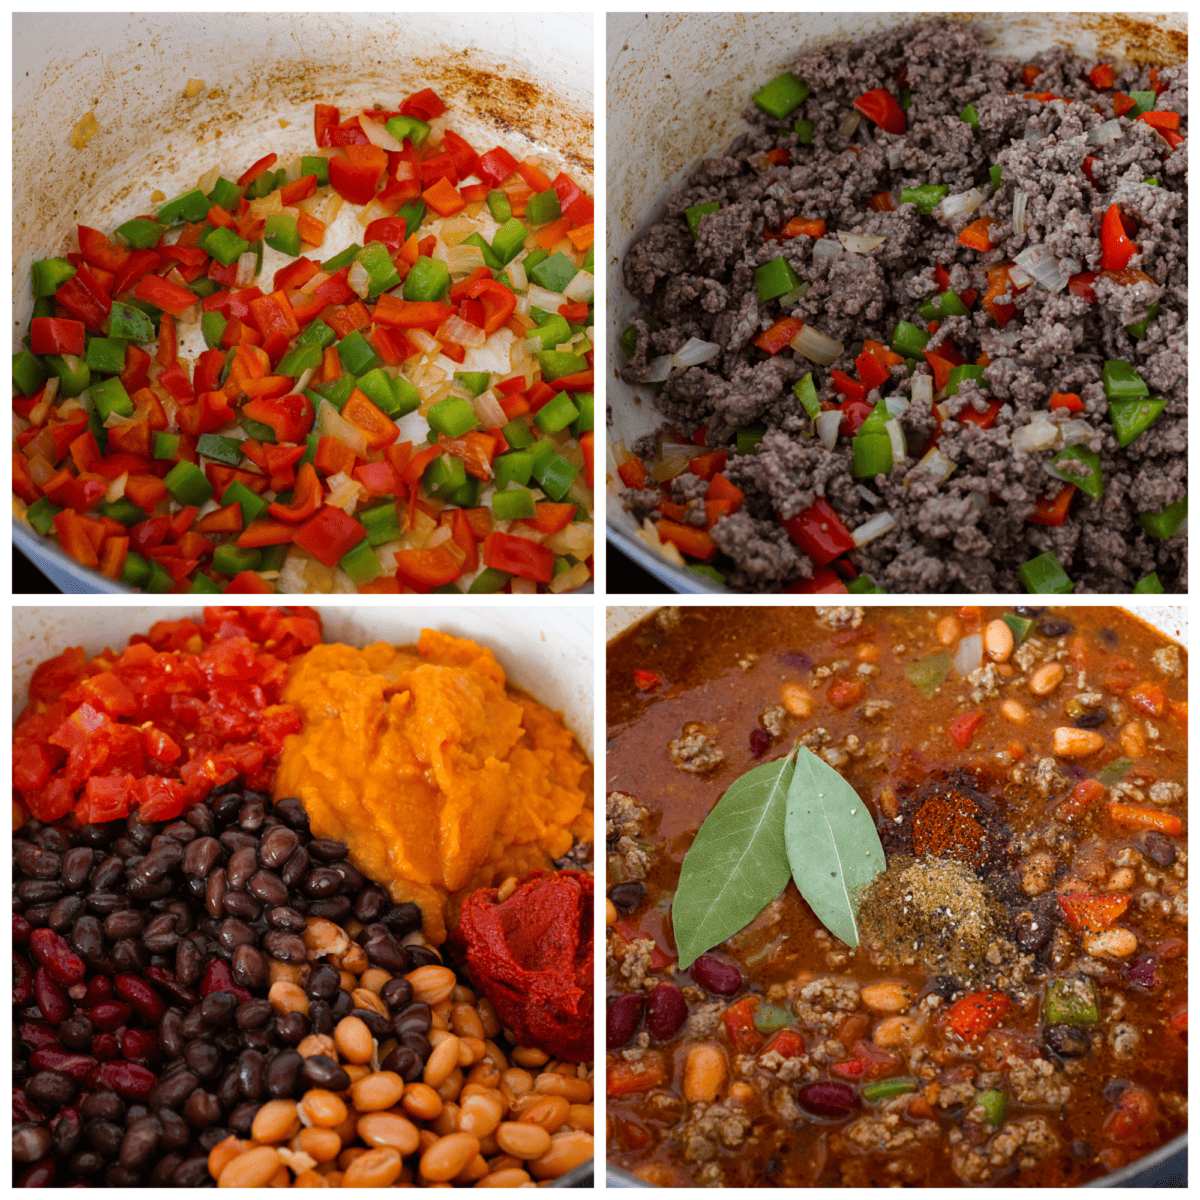 4-photo collage of chili ingredients being combined.